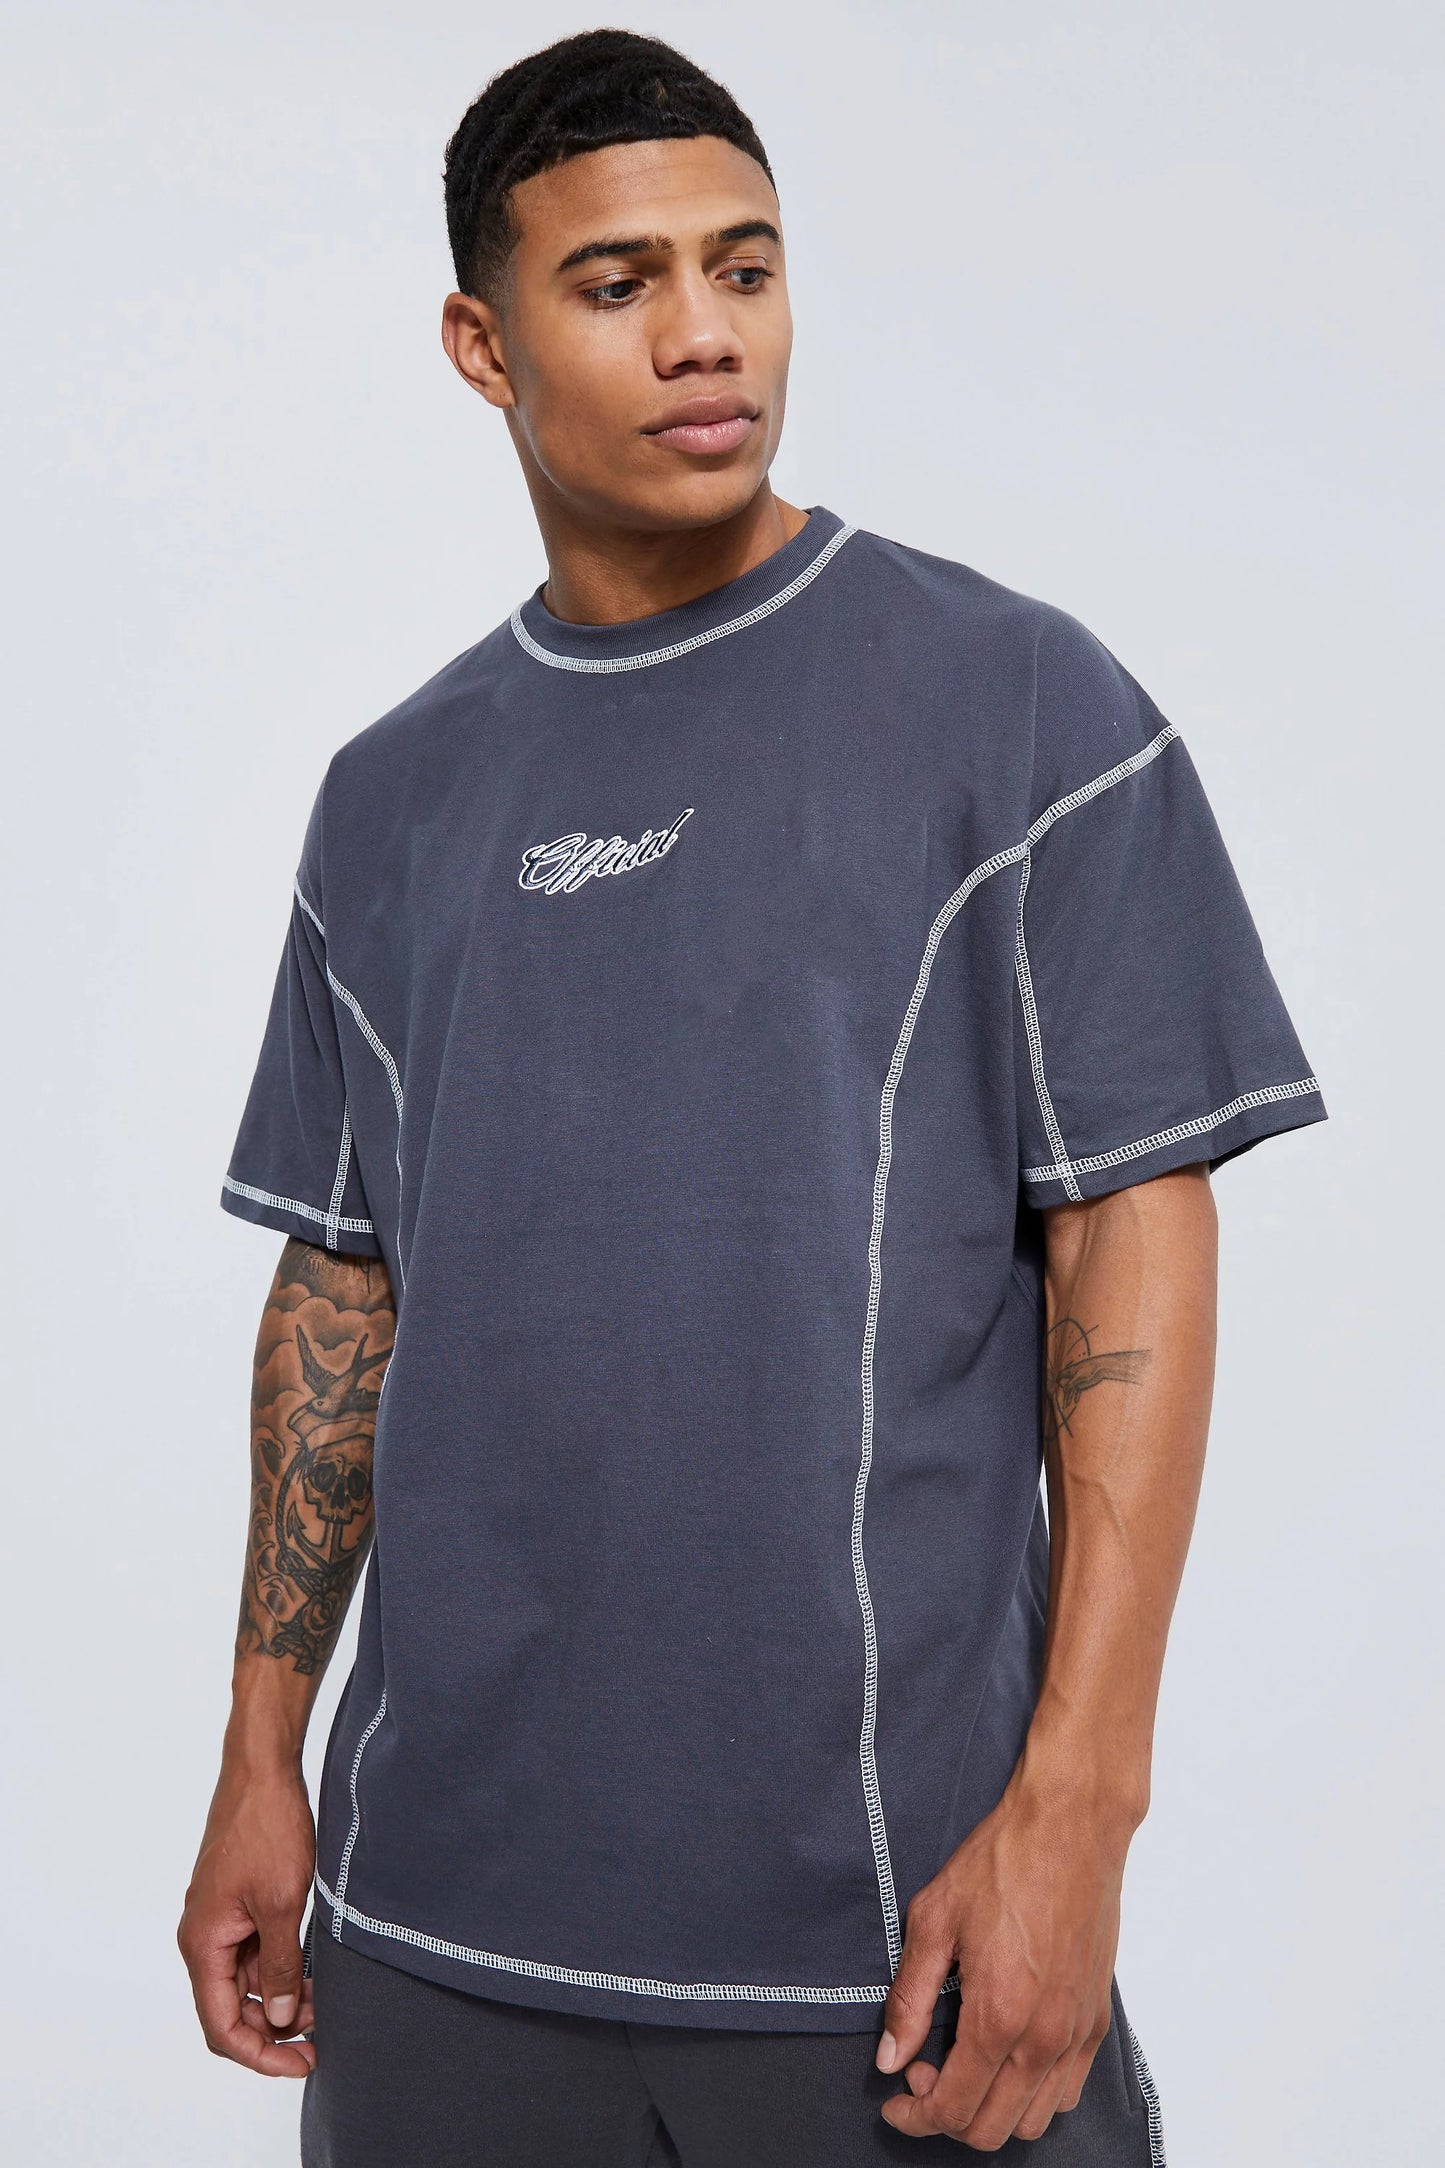 BOOHOOMAN OFFICIAL OVERSIZED CONTRAST STITCH T-SHIRT DARK GREY